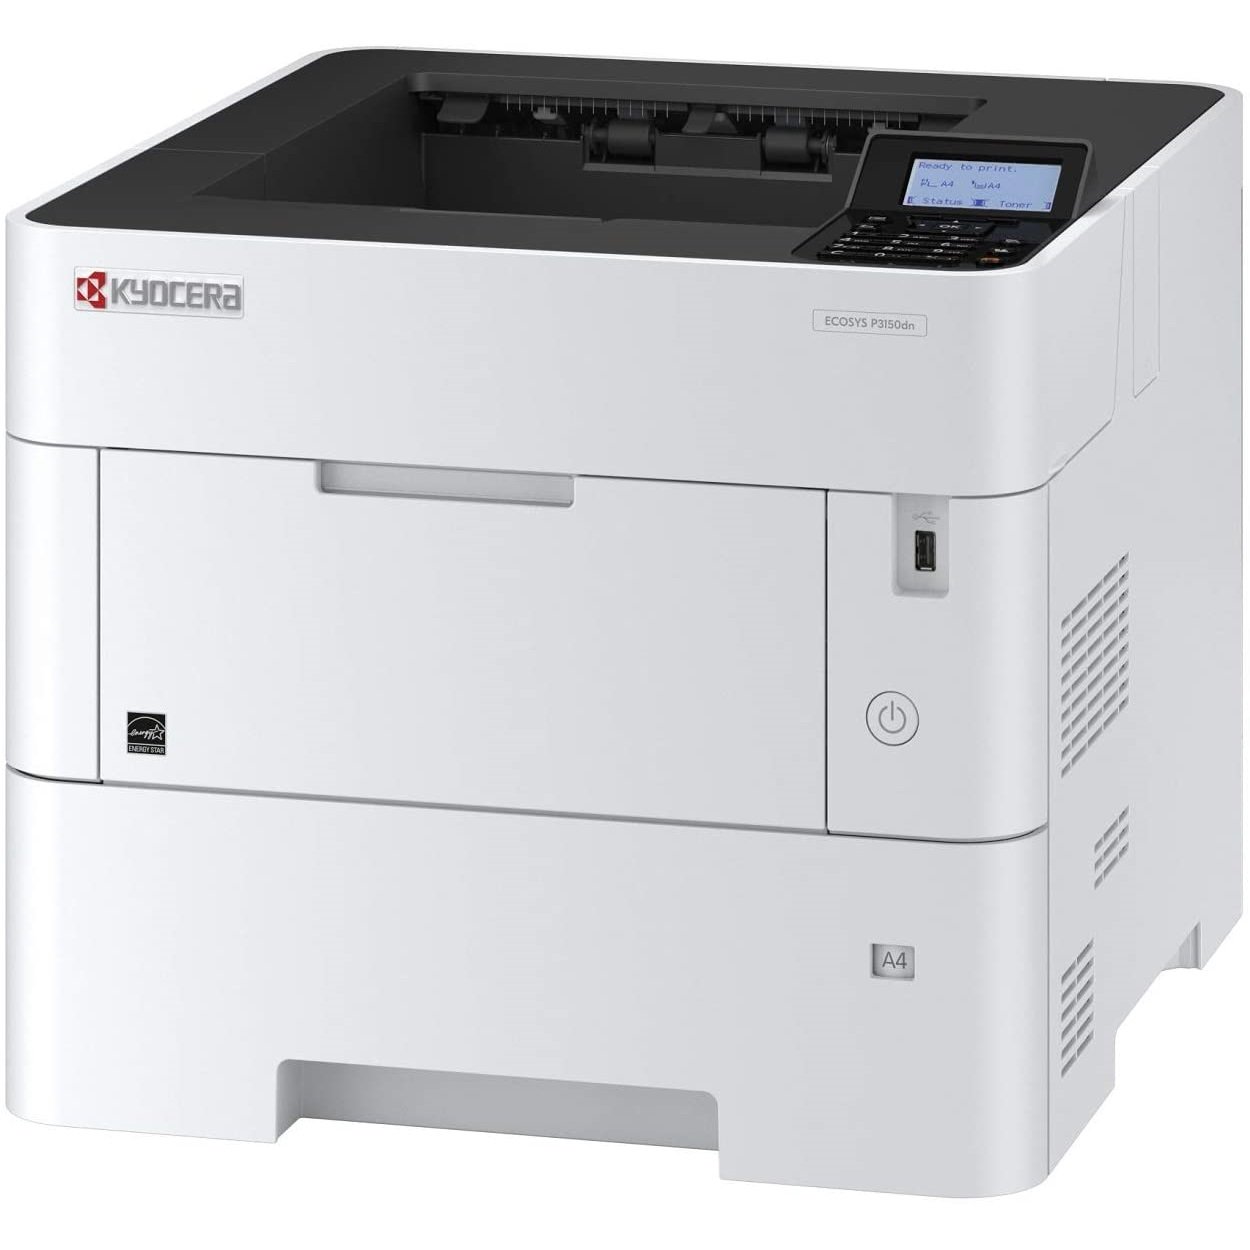 Absolute Toner $34.25/Month Kyocera ECOSYS P3150dn B/W Monochrome Laser Printer For Office Use Showroom Monochrome Copiers